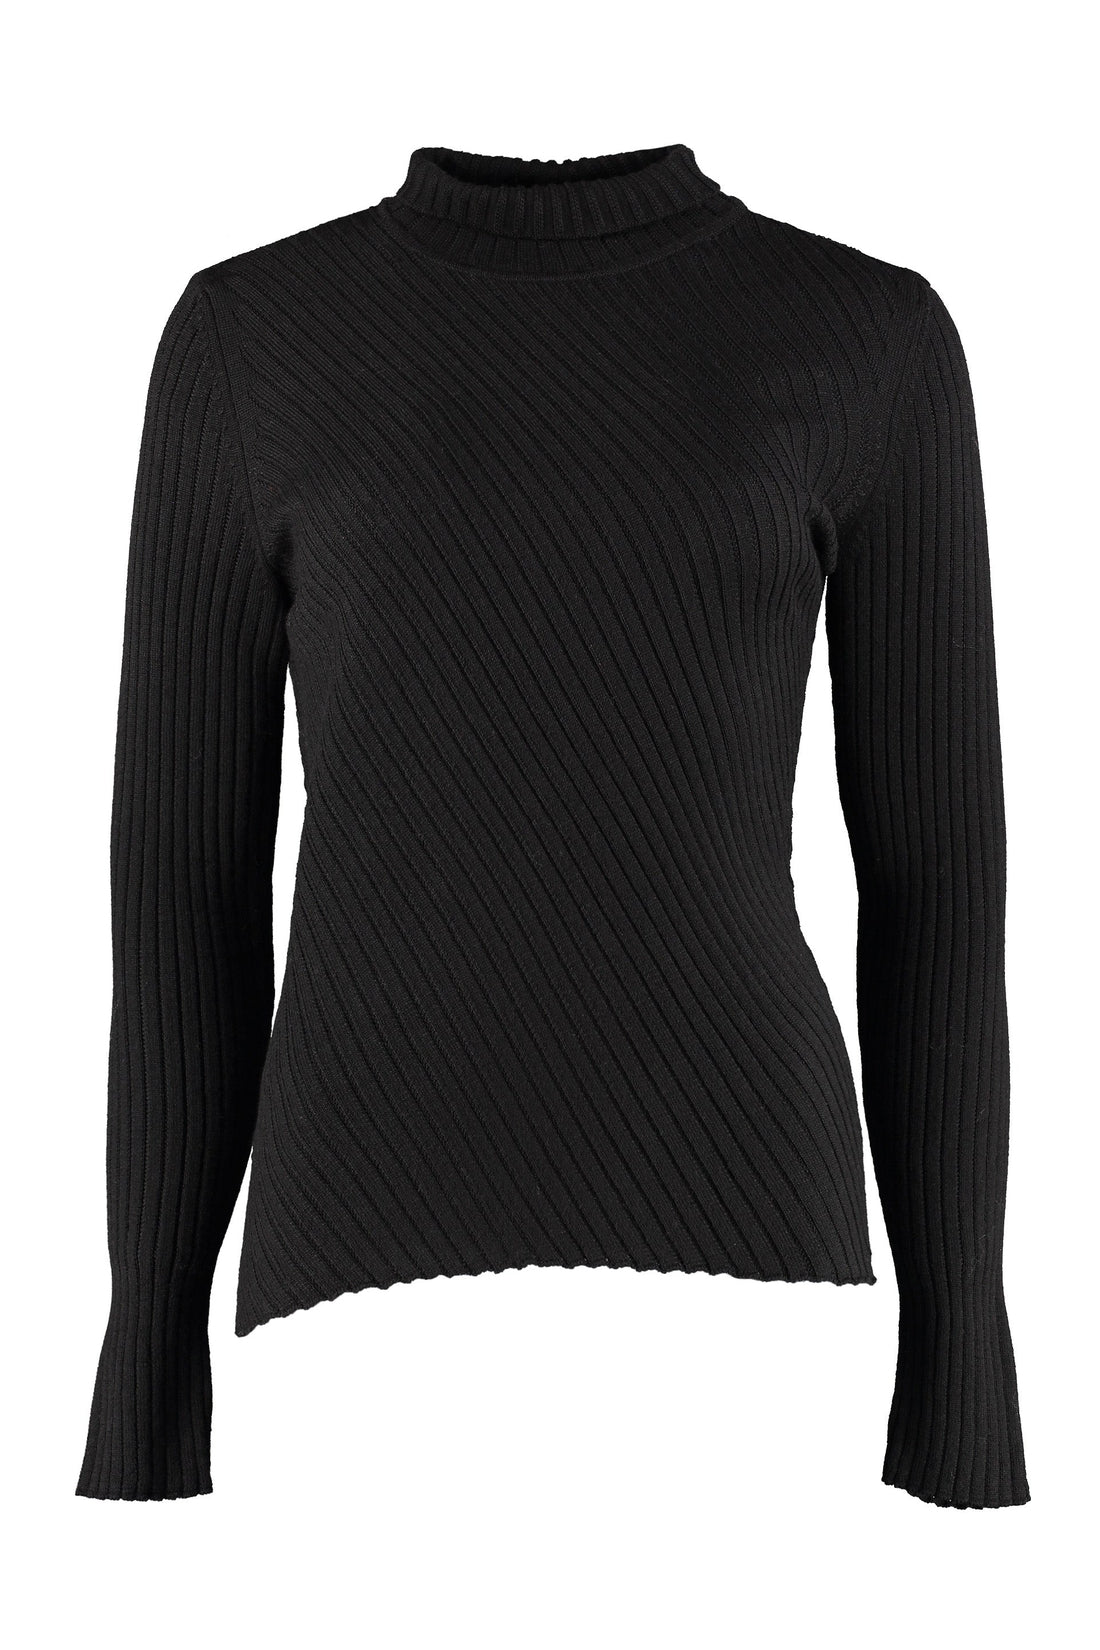 Pinko-OUTLET-SALE-Precolombiano ribbed turtleneck sweater-ARCHIVIST